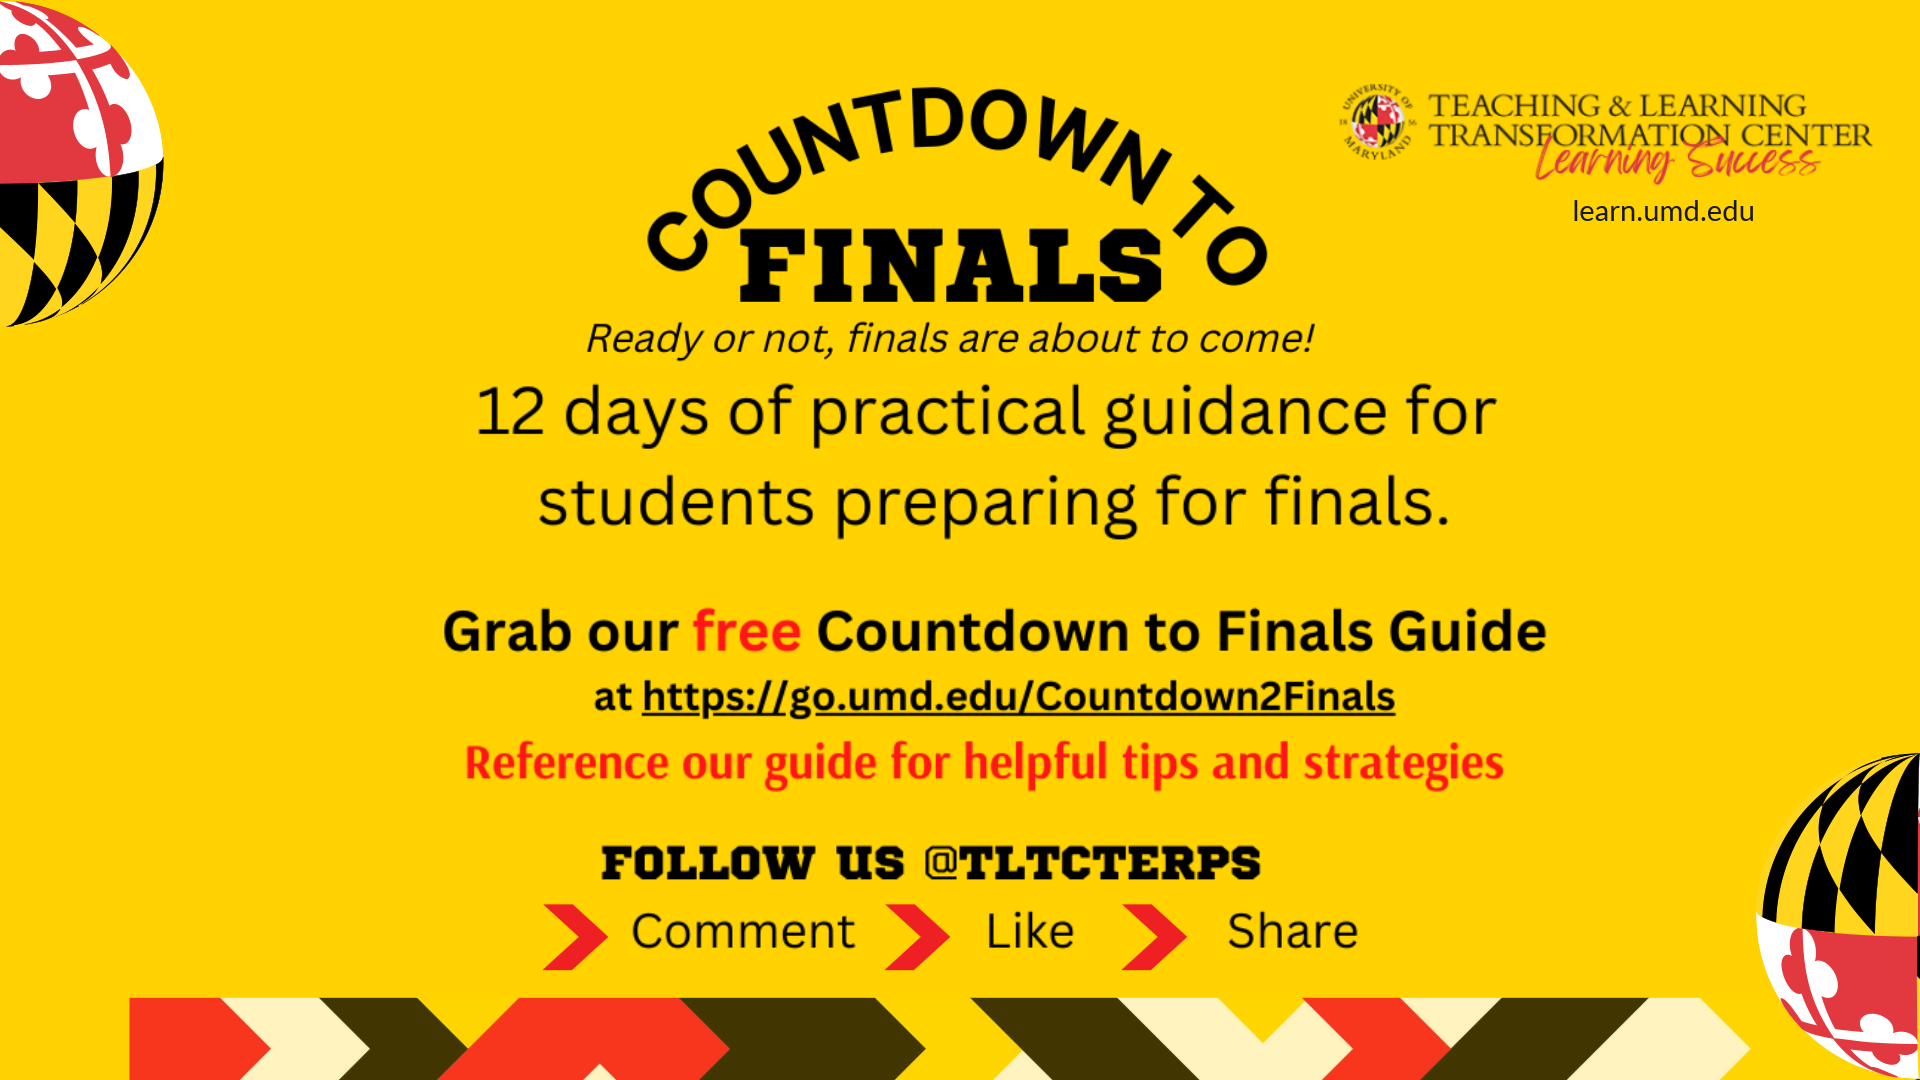 Countdown to Finals Overview